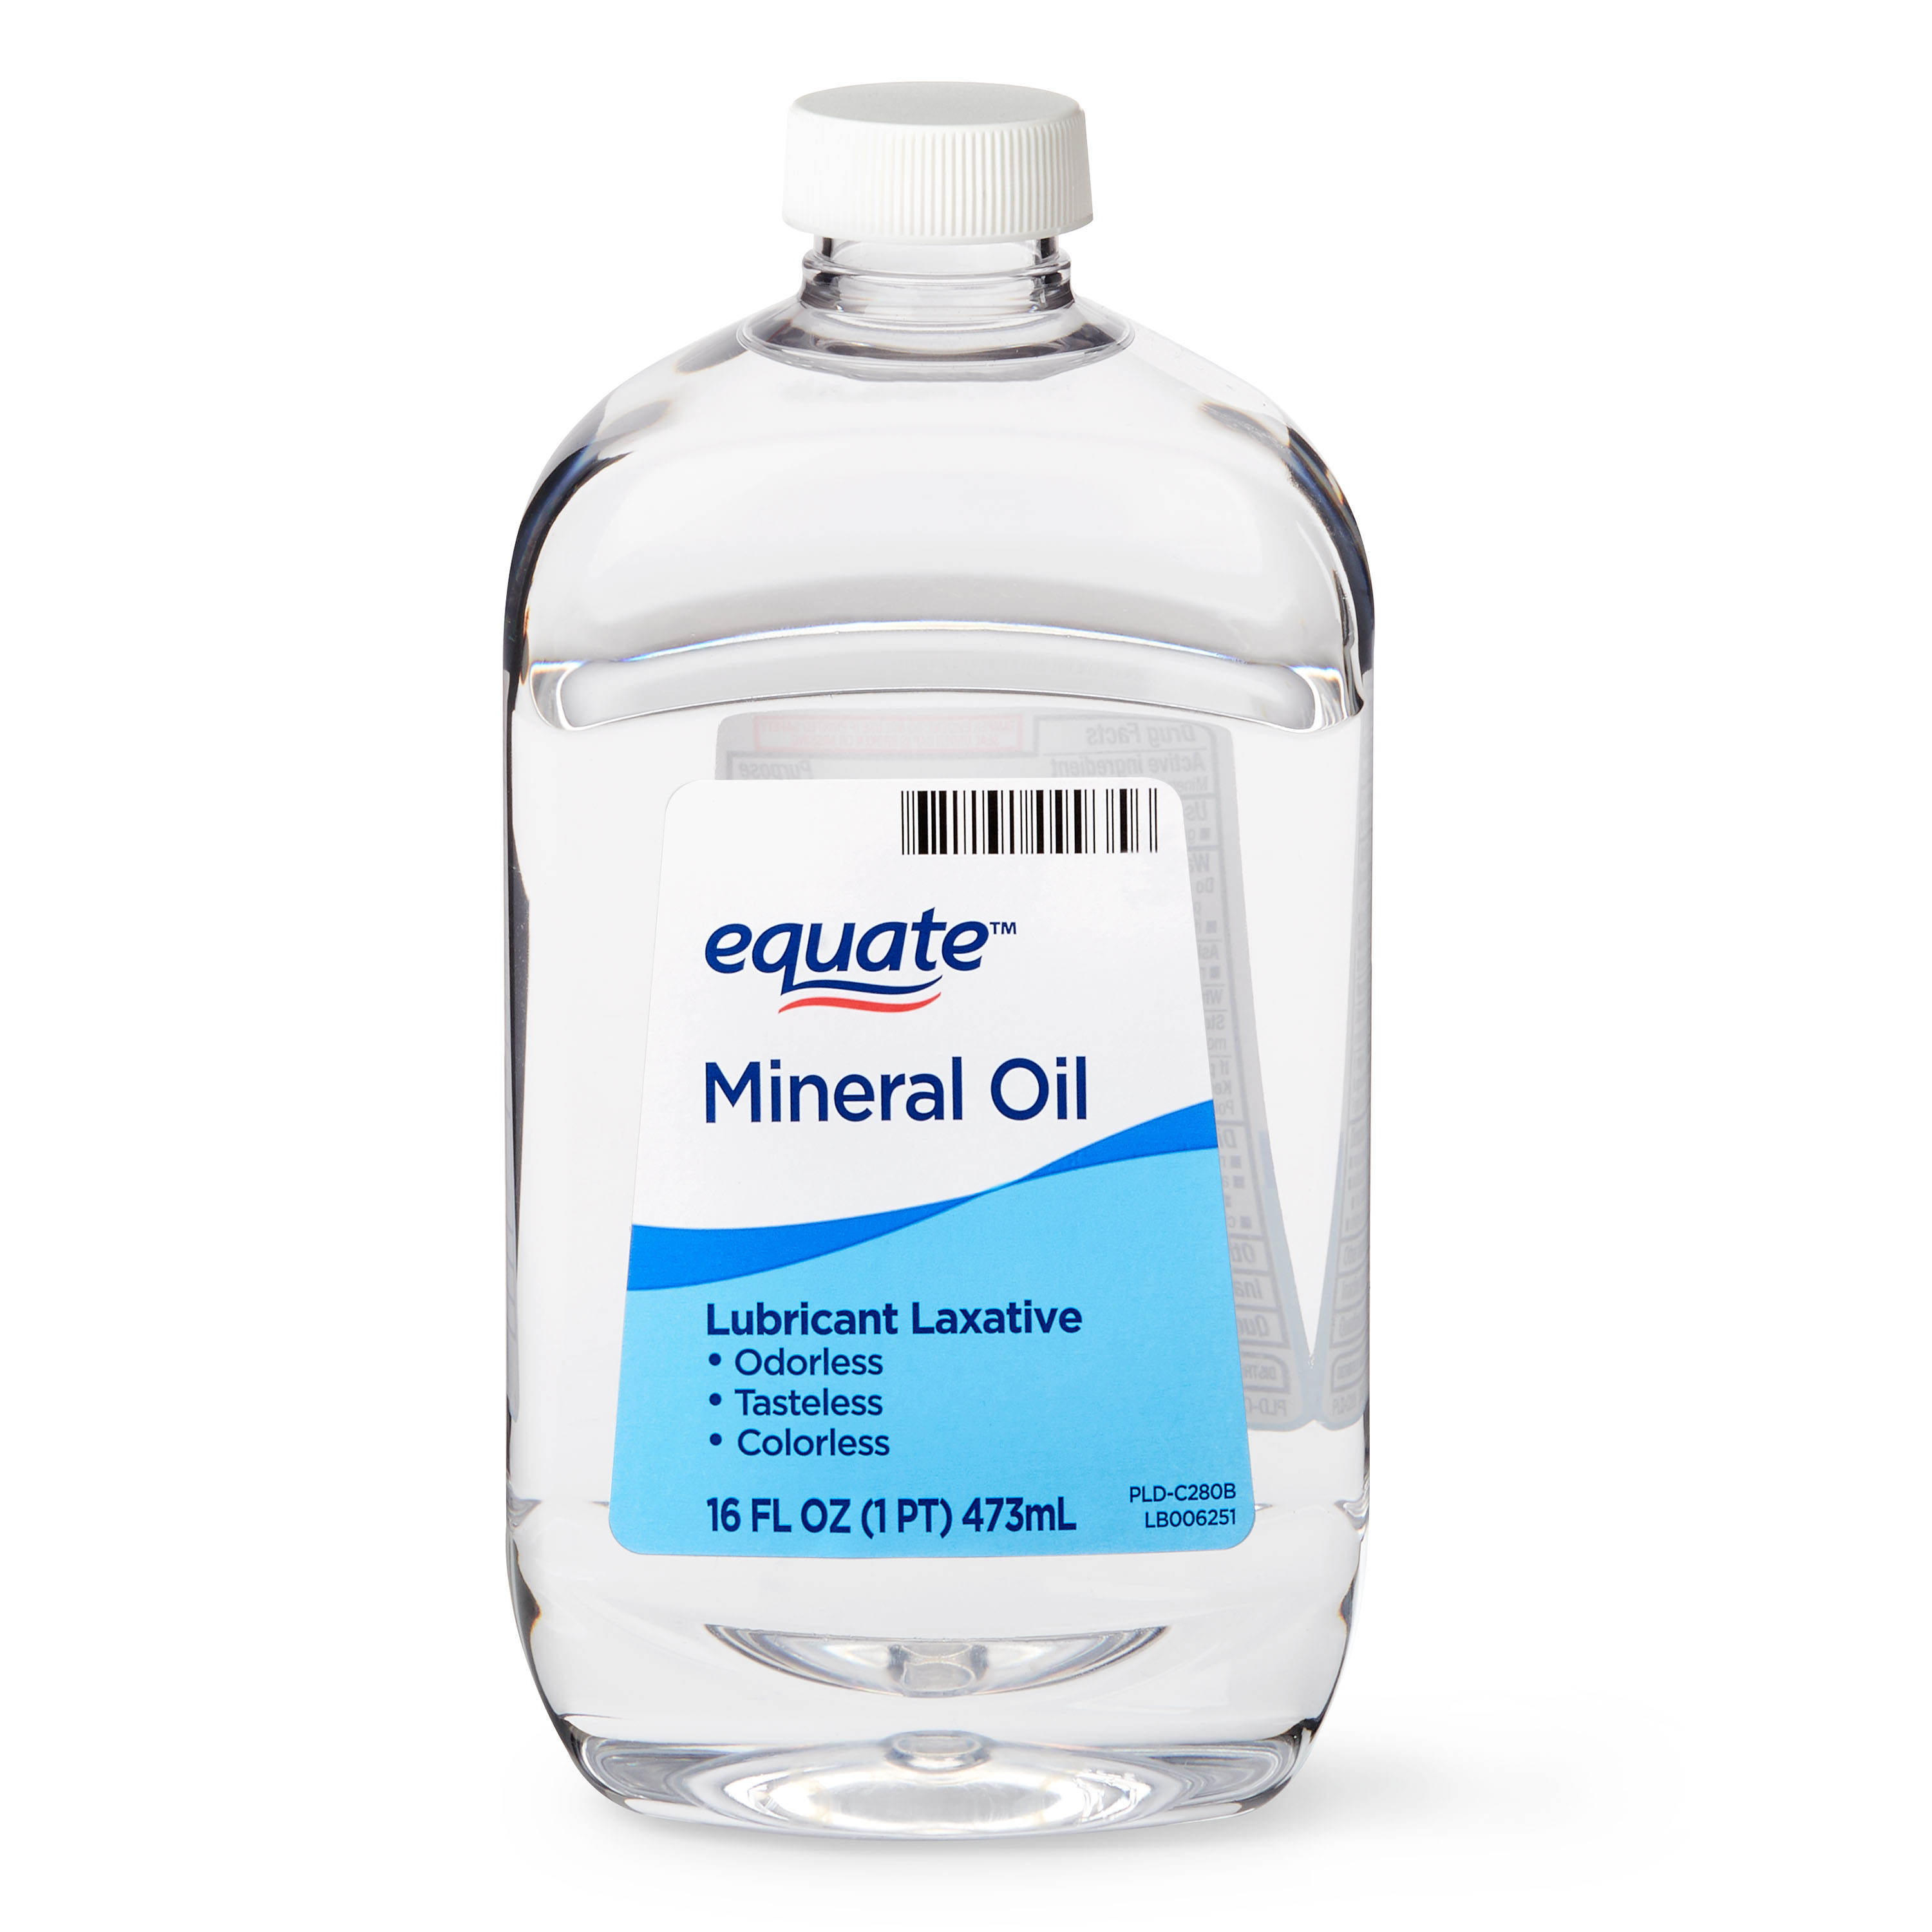 Equate Mineral Oil Lubricant Laxative Liquid for Constipation, 16 fl oz (474mL) - image 1 of 9